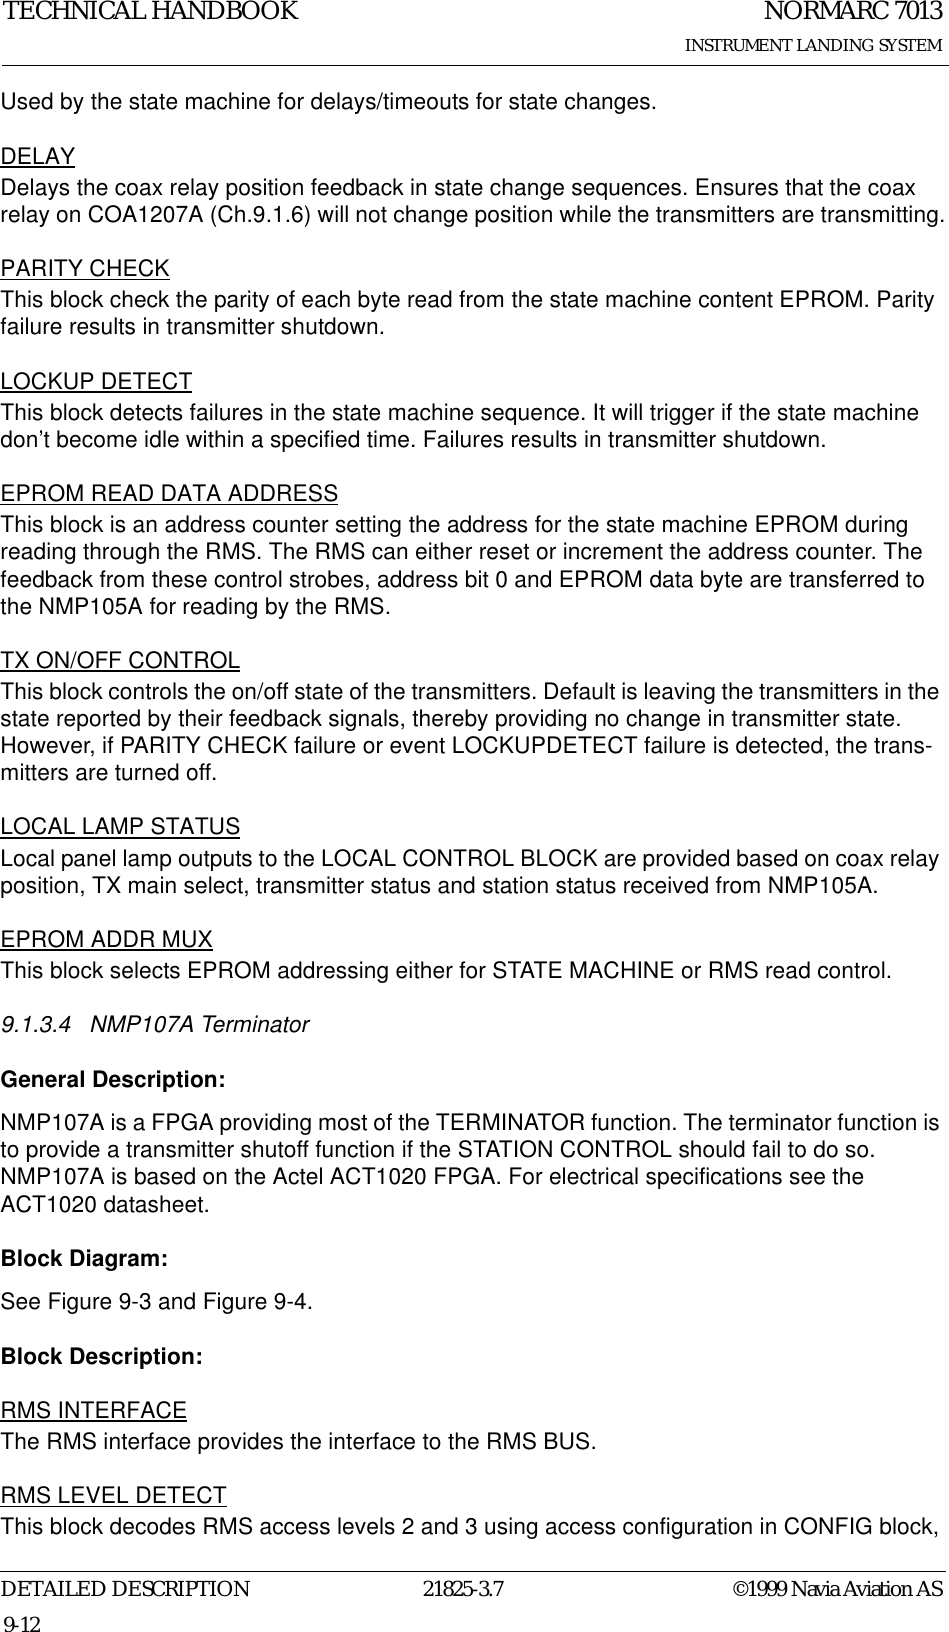 NORMARC 7013INSTRUMENT LANDING SYSTEMTECHNICAL HANDBOOKDETAILED DESCRIPTION 21825-3.7 ©1999 Navia Aviation AS9-12Used by the state machine for delays/timeouts for state changes.DELAYDelays the coax relay position feedback in state change sequences. Ensures that the coax relay on COA1207A (Ch.9.1.6) will not change position while the transmitters are transmitting.PARITY CHECKThis block check the parity of each byte read from the state machine content EPROM. Parity failure results in transmitter shutdown.LOCKUP DETECTThis block detects failures in the state machine sequence. It will trigger if the state machine don’t become idle within a specified time. Failures results in transmitter shutdown.EPROM READ DATA ADDRESSThis block is an address counter setting the address for the state machine EPROM during reading through the RMS. The RMS can either reset or increment the address counter. The feedback from these control strobes, address bit 0 and EPROM data byte are transferred to the NMP105A for reading by the RMS.TX ON/OFF CONTROLThis block controls the on/off state of the transmitters. Default is leaving the transmitters in the state reported by their feedback signals, thereby providing no change in transmitter state. However, if PARITY CHECK failure or event LOCKUPDETECT failure is detected, the trans-mitters are turned off.LOCAL LAMP STATUSLocal panel lamp outputs to the LOCAL CONTROL BLOCK are provided based on coax relay position, TX main select, transmitter status and station status received from NMP105A.EPROM ADDR MUXThis block selects EPROM addressing either for STATE MACHINE or RMS read control.9.1.3.4 NMP107A Terminator General Description:NMP107A is a FPGA providing most of the TERMINATOR function. The terminator function is to provide a transmitter shutoff function if the STATION CONTROL should fail to do so. NMP107A is based on the Actel ACT1020 FPGA. For electrical specifications see the ACT1020 datasheet.Block Diagram:See Figure 9-3 and Figure 9-4.Block Description:RMS INTERFACEThe RMS interface provides the interface to the RMS BUS.RMS LEVEL DETECTThis block decodes RMS access levels 2 and 3 using access configuration in CONFIG block, 